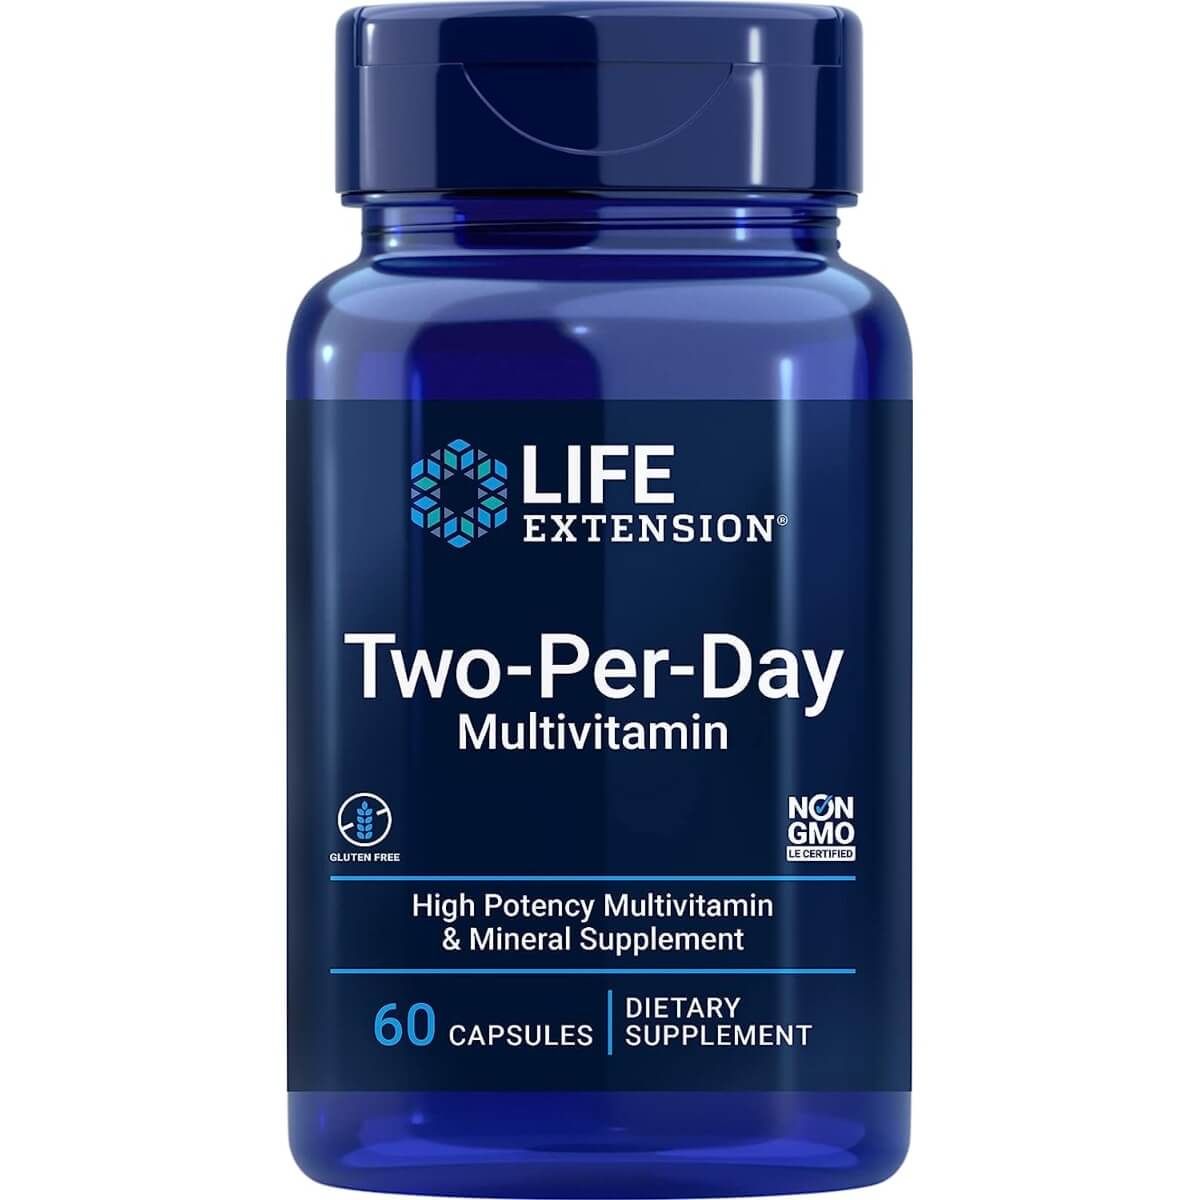 Photos - Vitamins & Minerals Life Extension Two-Per-Day Multivitamin 60 Capsules PBW-P34769 